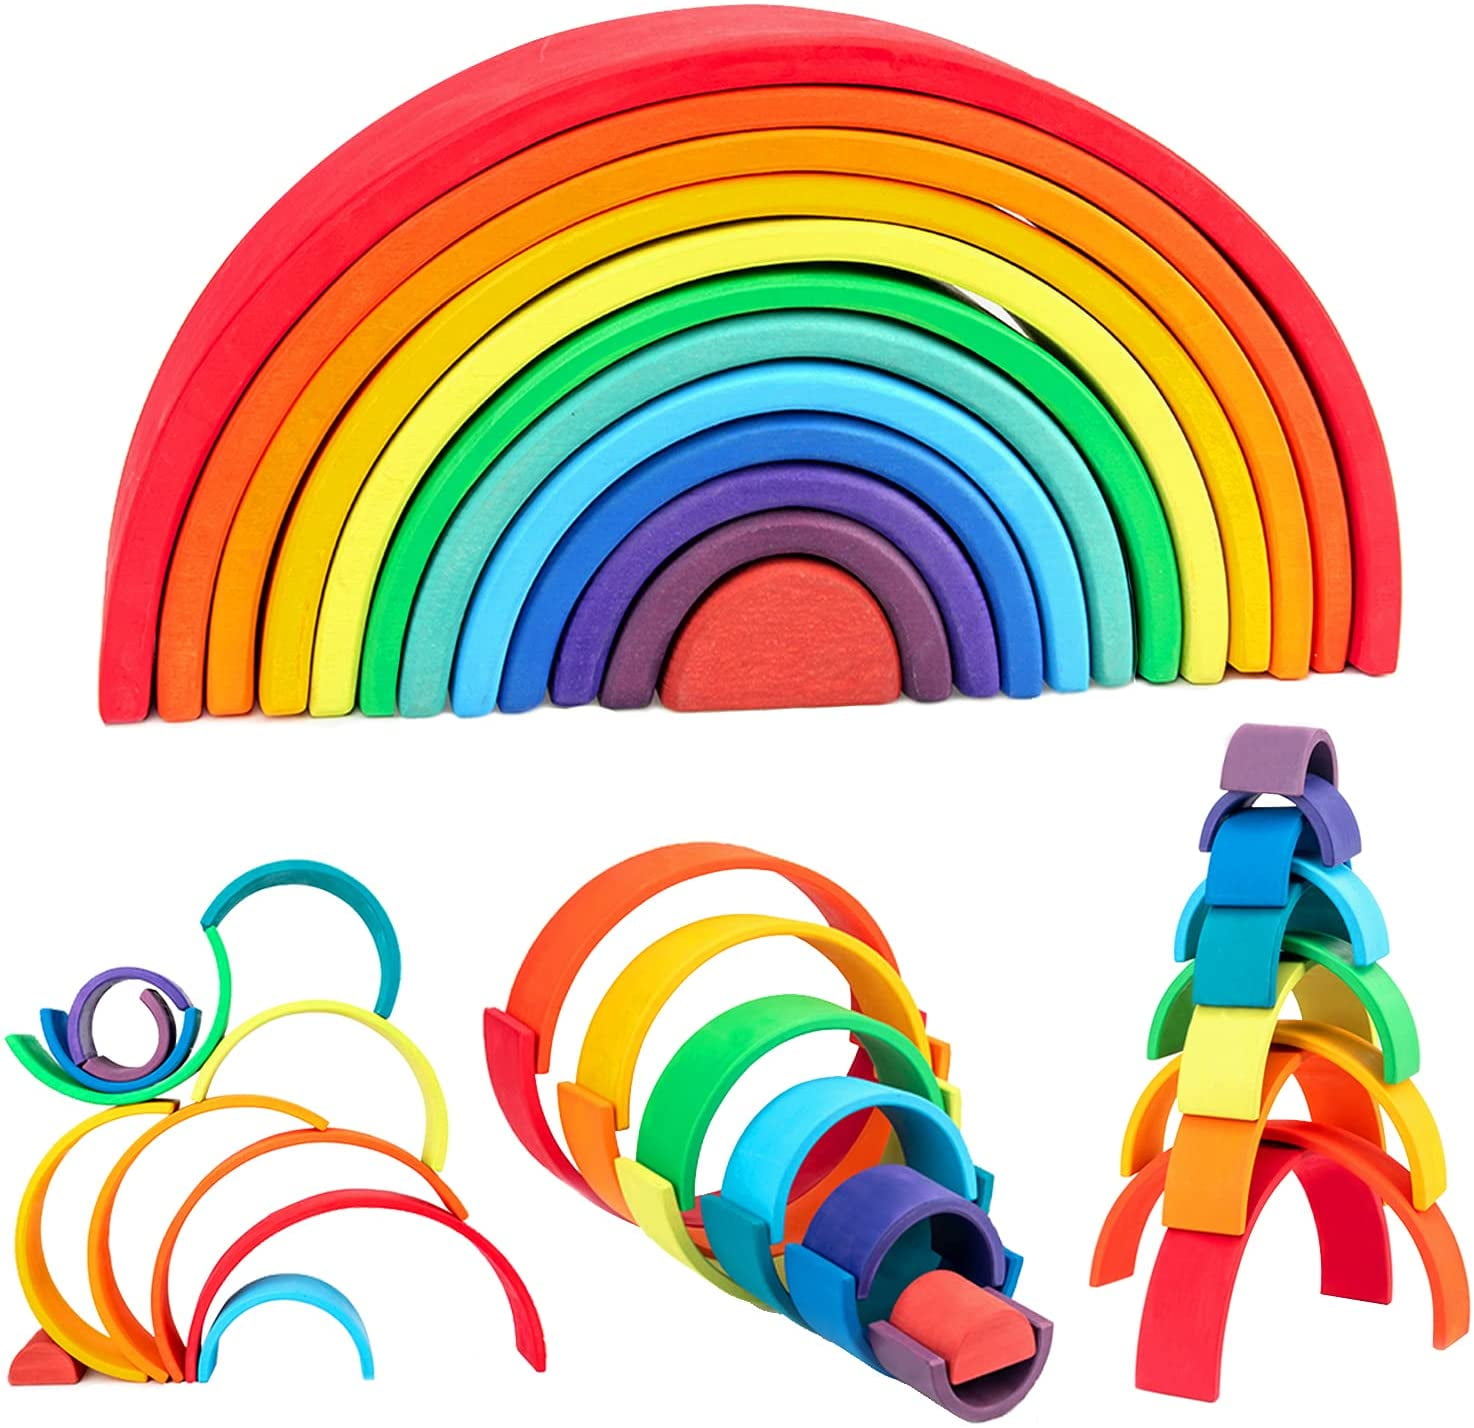 Wooden rainbow arch Montessori preschool Best toy Rainbow stacker classic toy Waldorf baby toys Sorting Stacking open ended play toys Stacking Blocks 5 Pcs pieces Small Caramel 